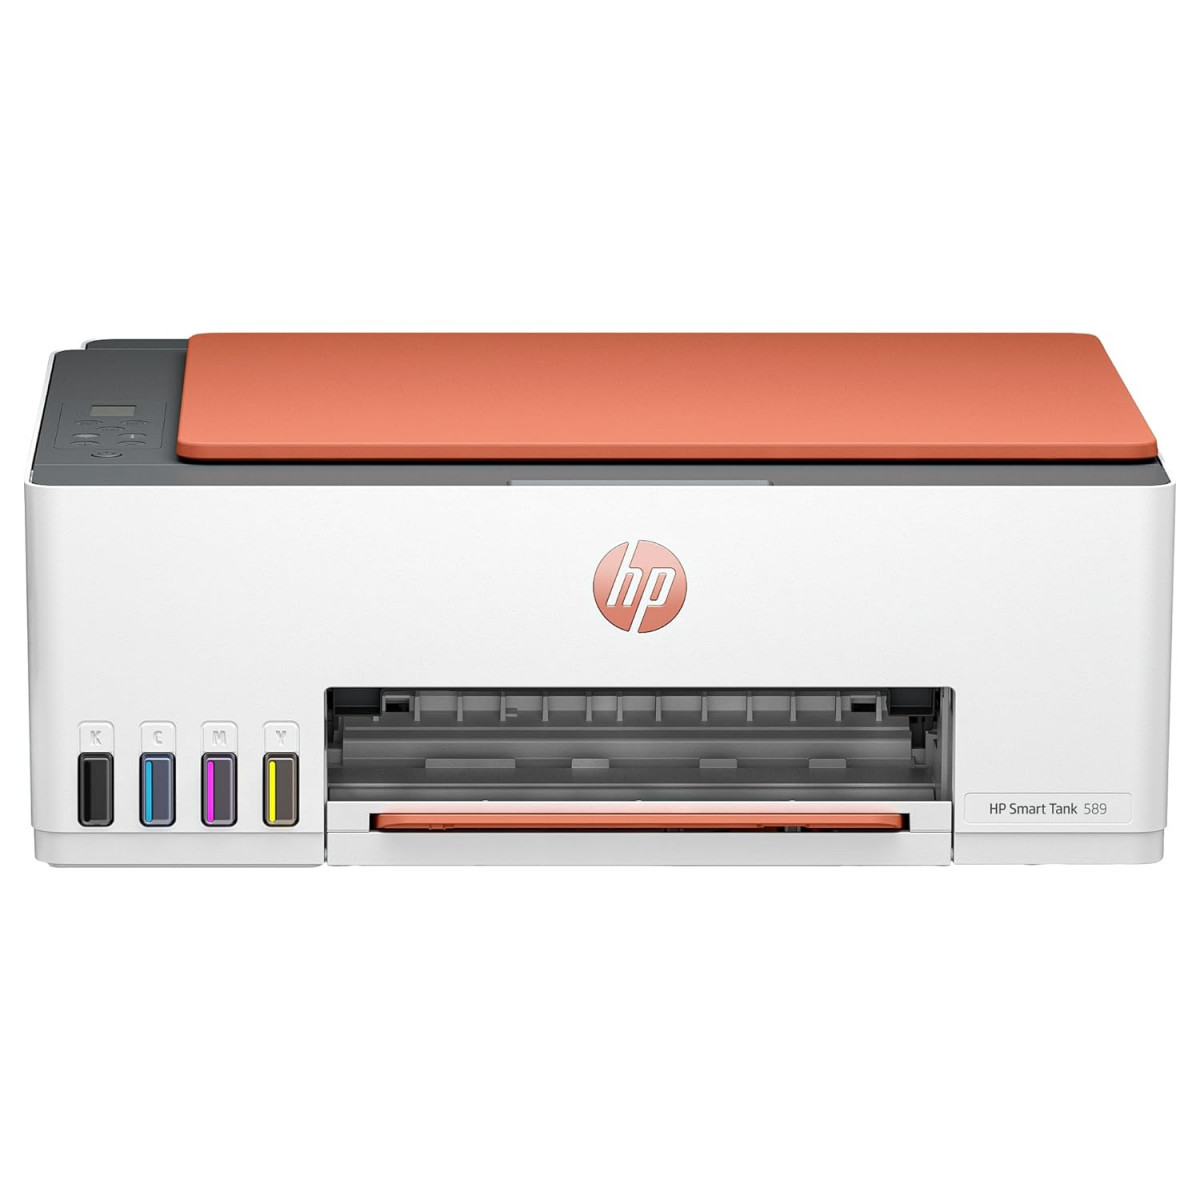 HP Smart Tank 589 AIO WiFi Colour Printer Upto 6000 Black  6000 Colour Pages Included in The Box